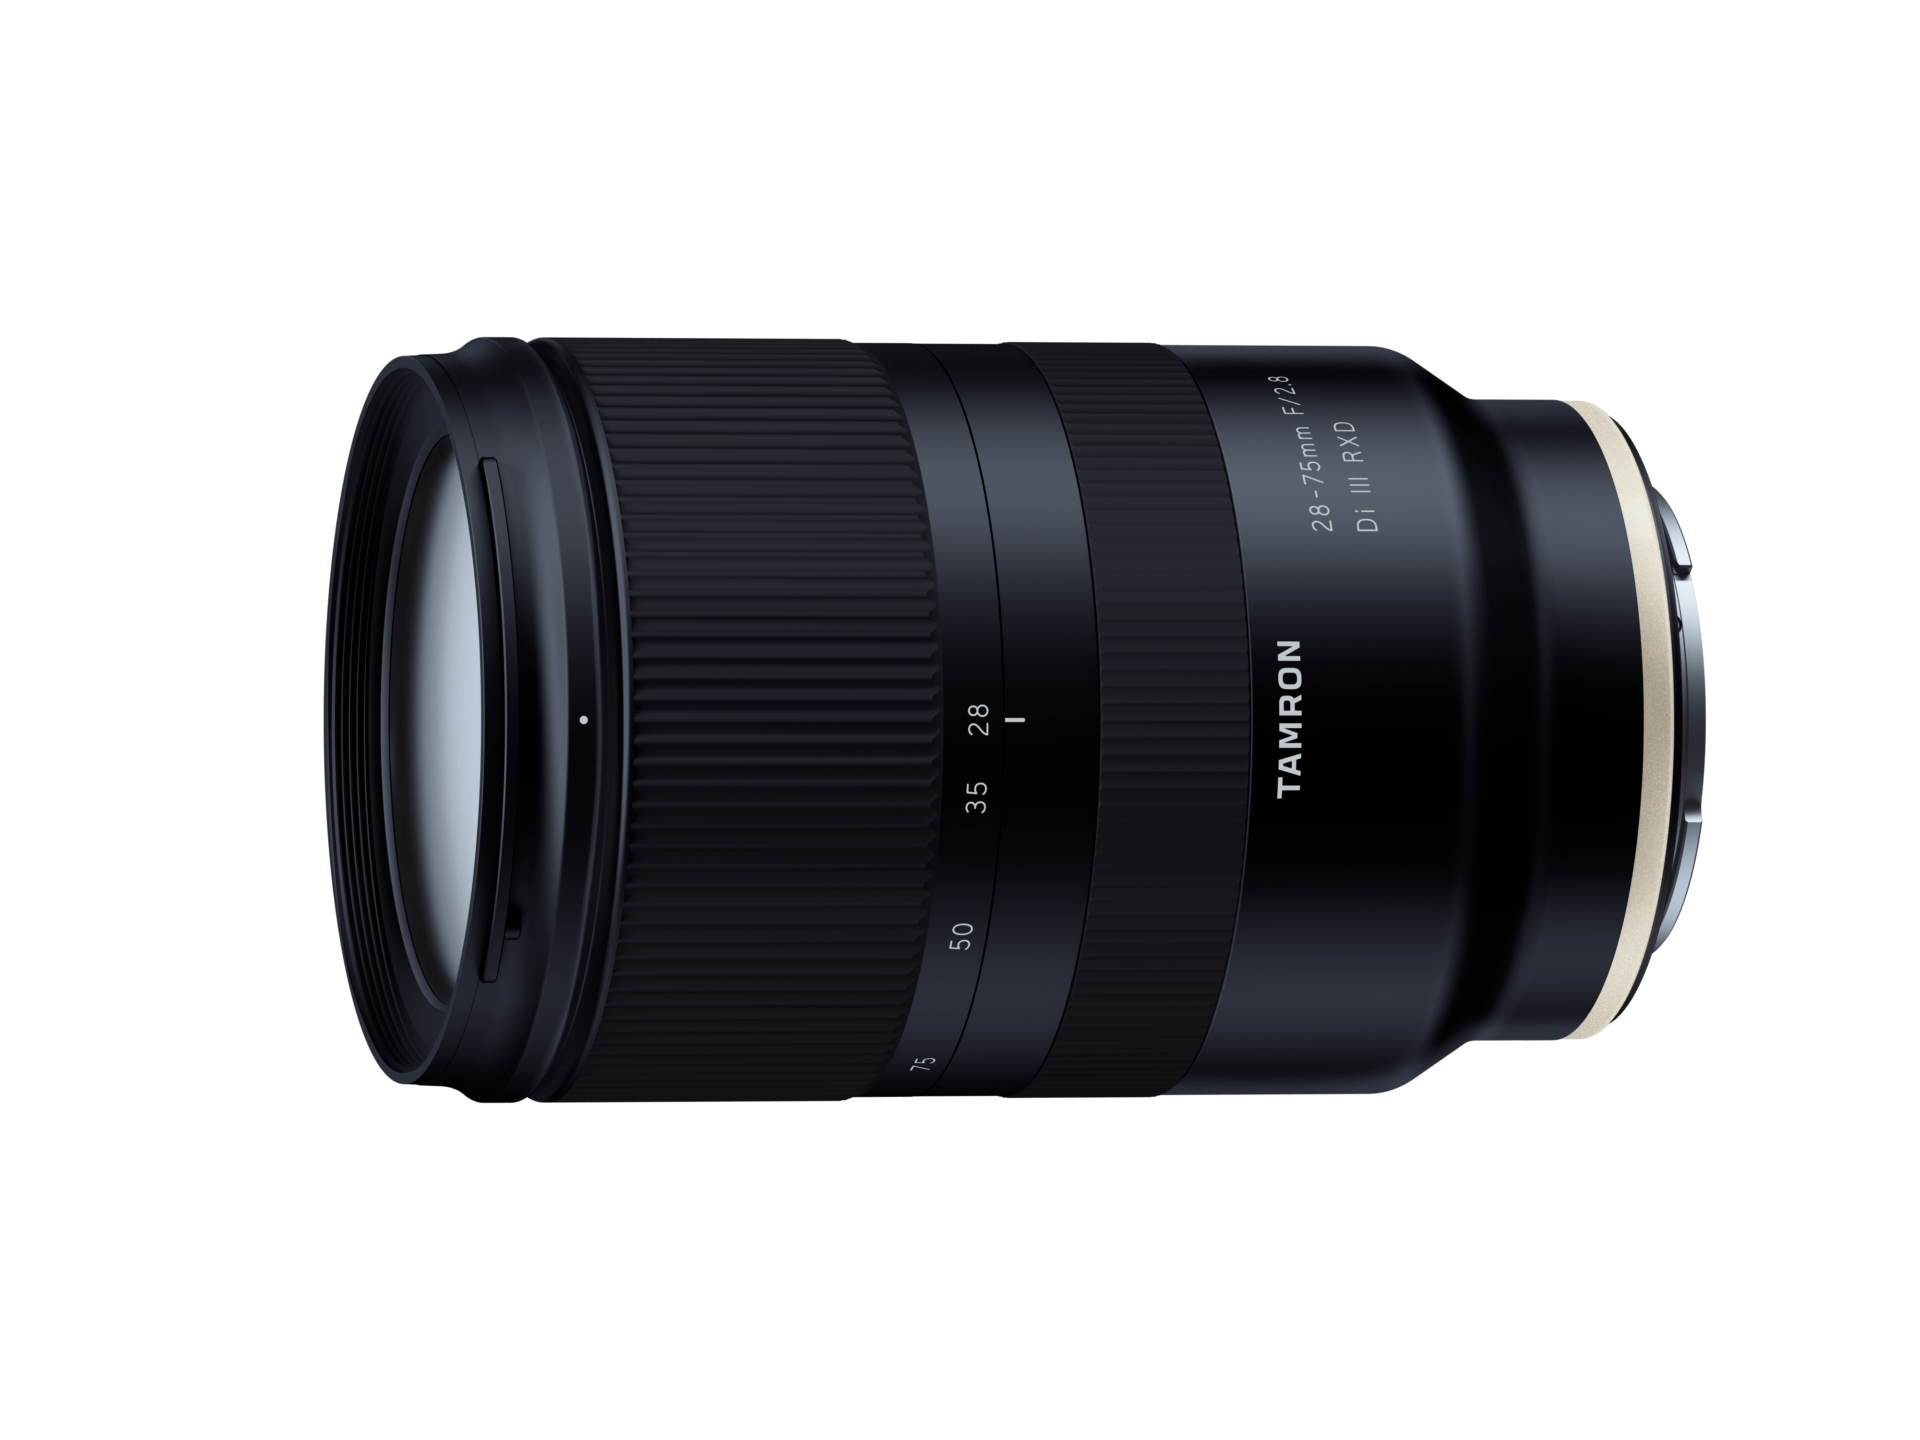 Tamron 28-75mm F2.8 Di III RXD (A036) for Sony E-mount | TAMRON HK